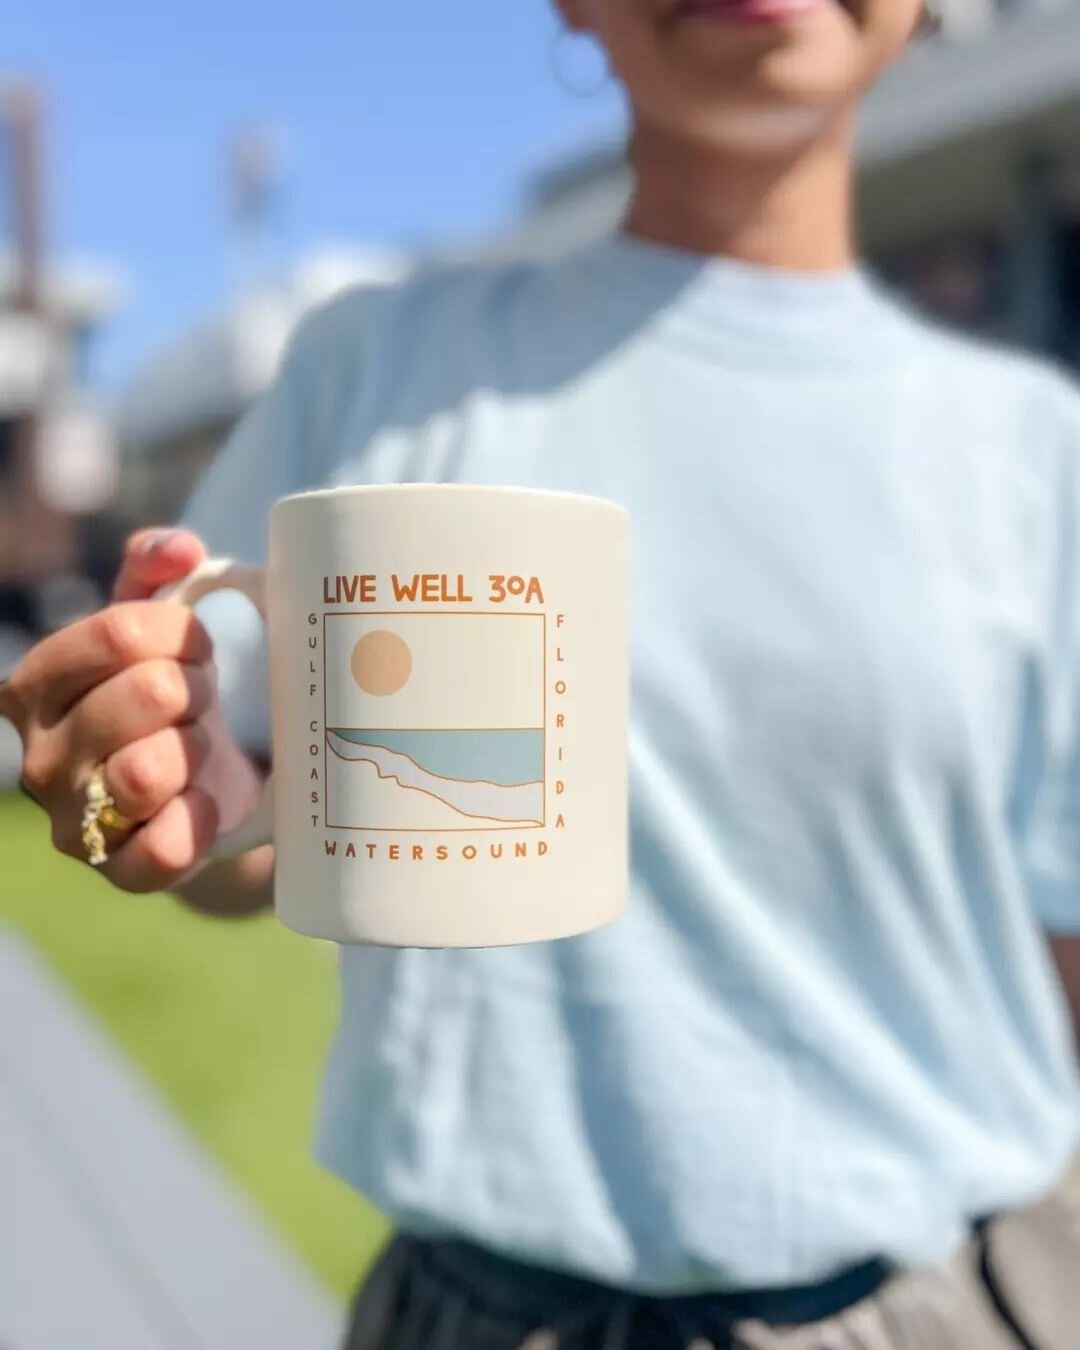 Start your morning off right with some sunshine ☀️ and a warm cup of joe ☕ in our new ceramic mug!

DM us to order/ship, or stop by and see us in person.